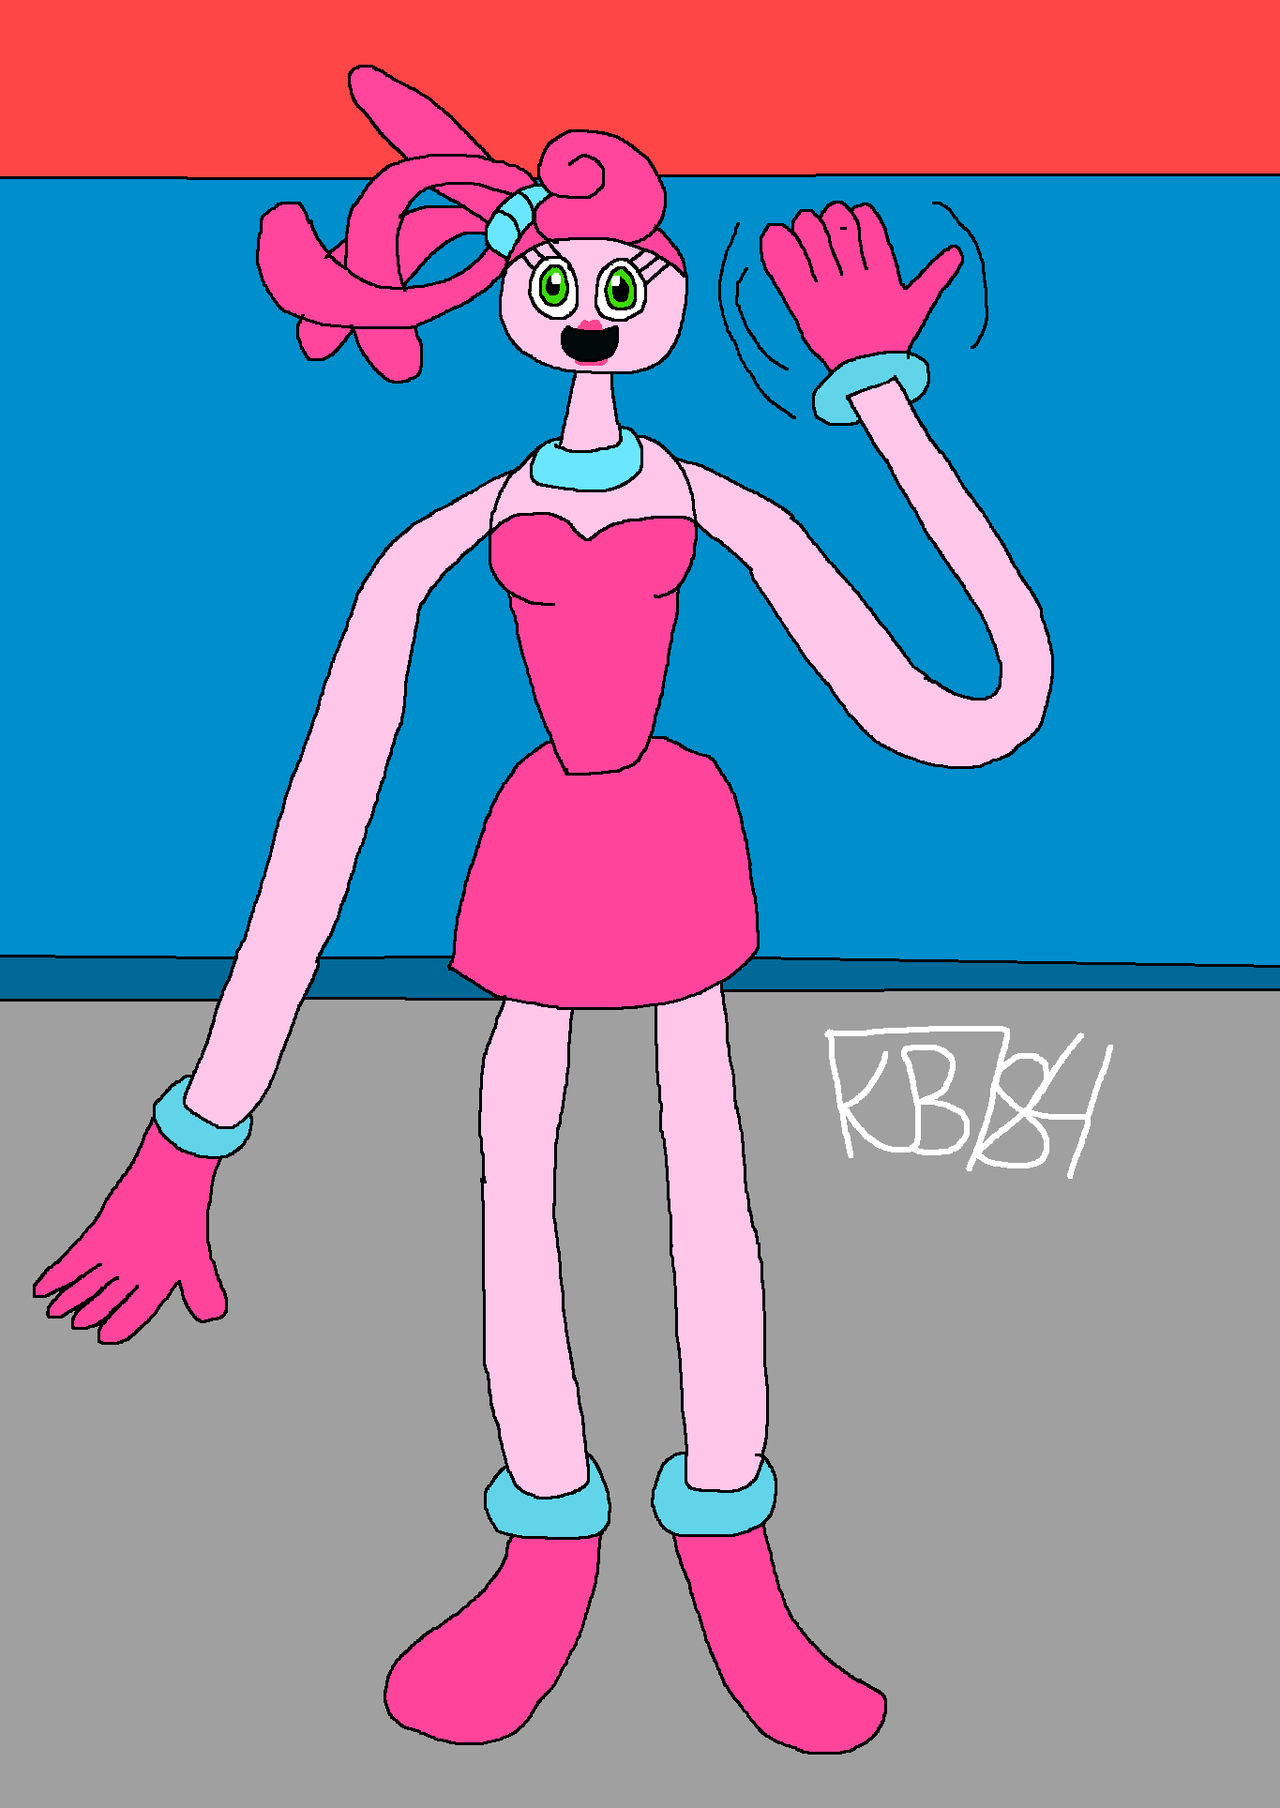 Mommy Long legs found the Spinel by Alex12357 on DeviantArt